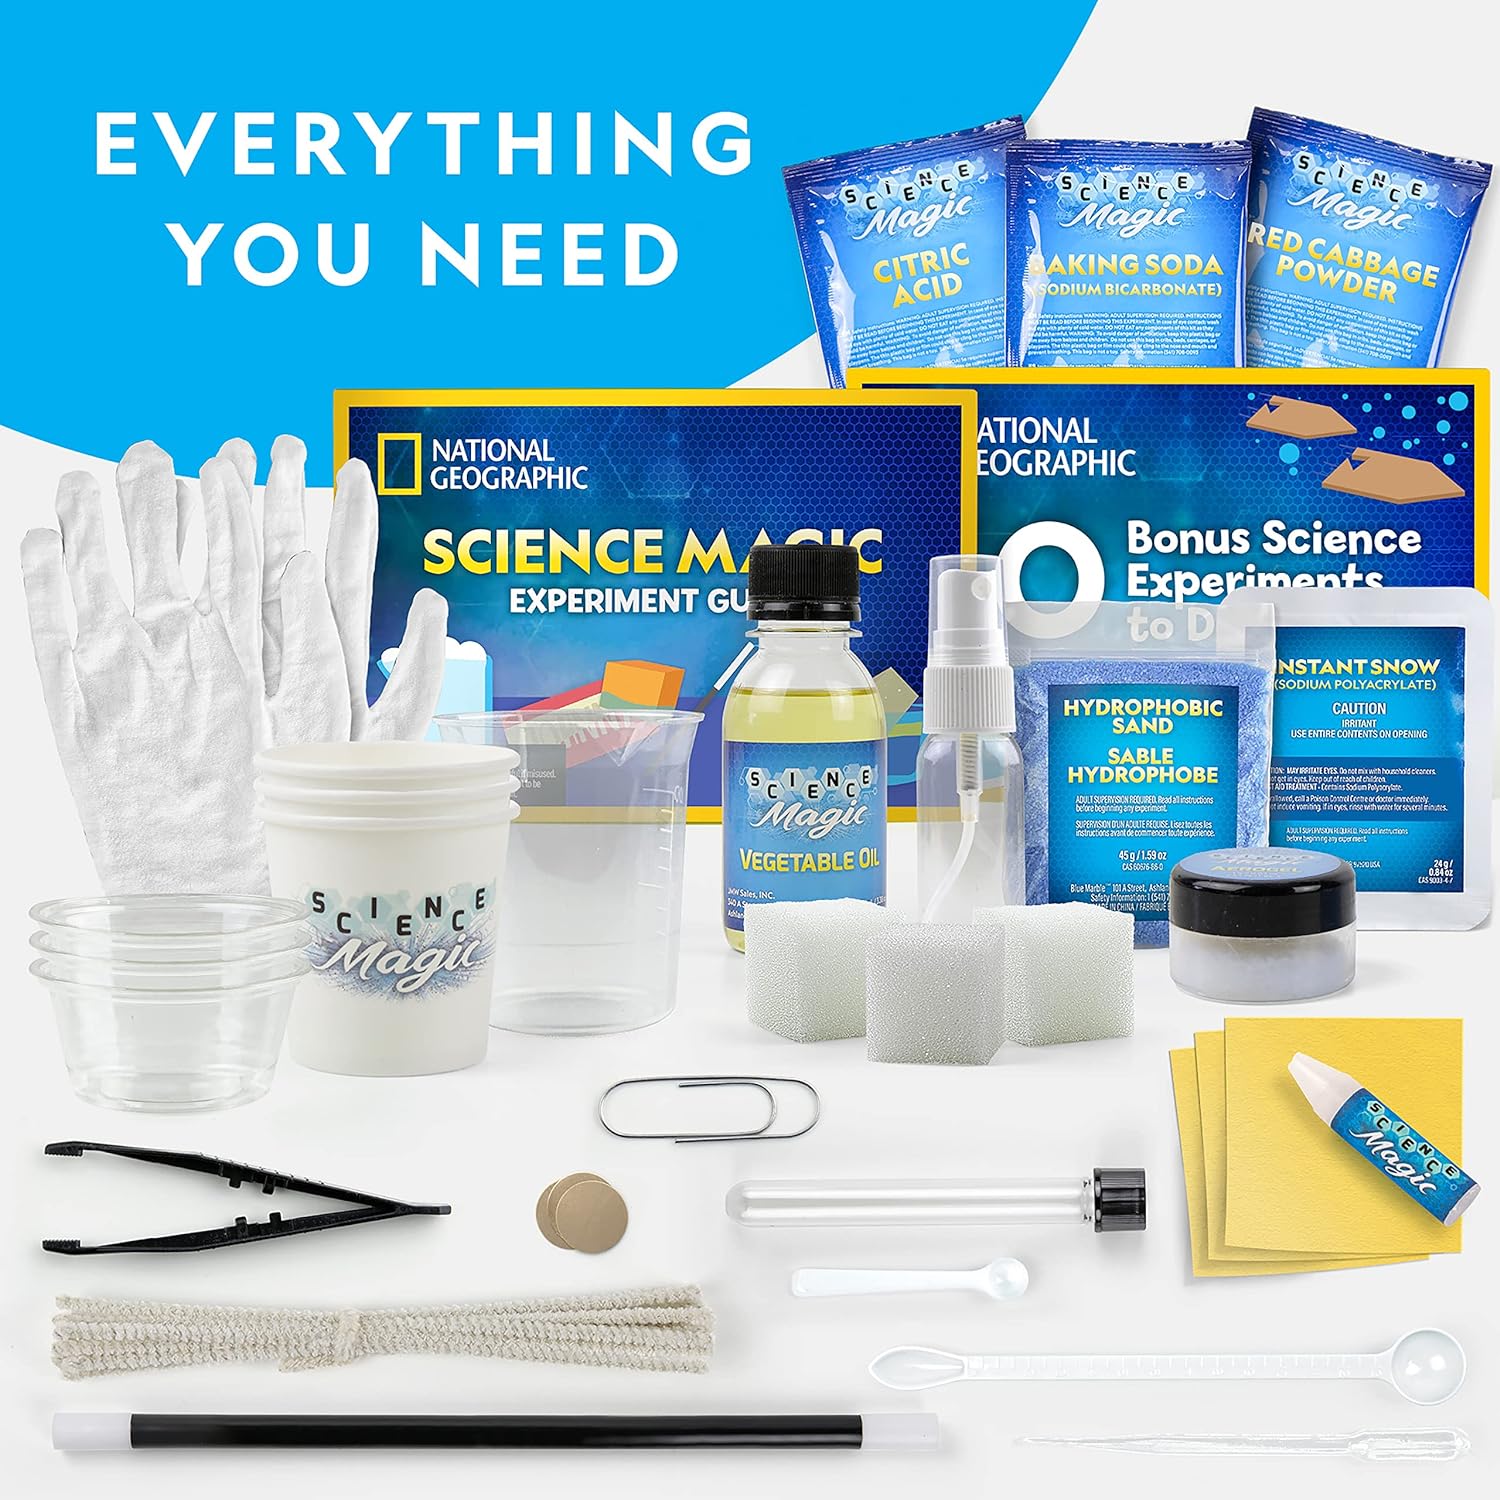 NATIONAL GEOGRAPHIC Science Magic Kit – Science Kit for Kids with 50 Unique Experiments and Magic Tricks, Chemistry Set and STEM Project, A Great Gift for Boys and Girls (Amazon Exclusive) : Toys Games